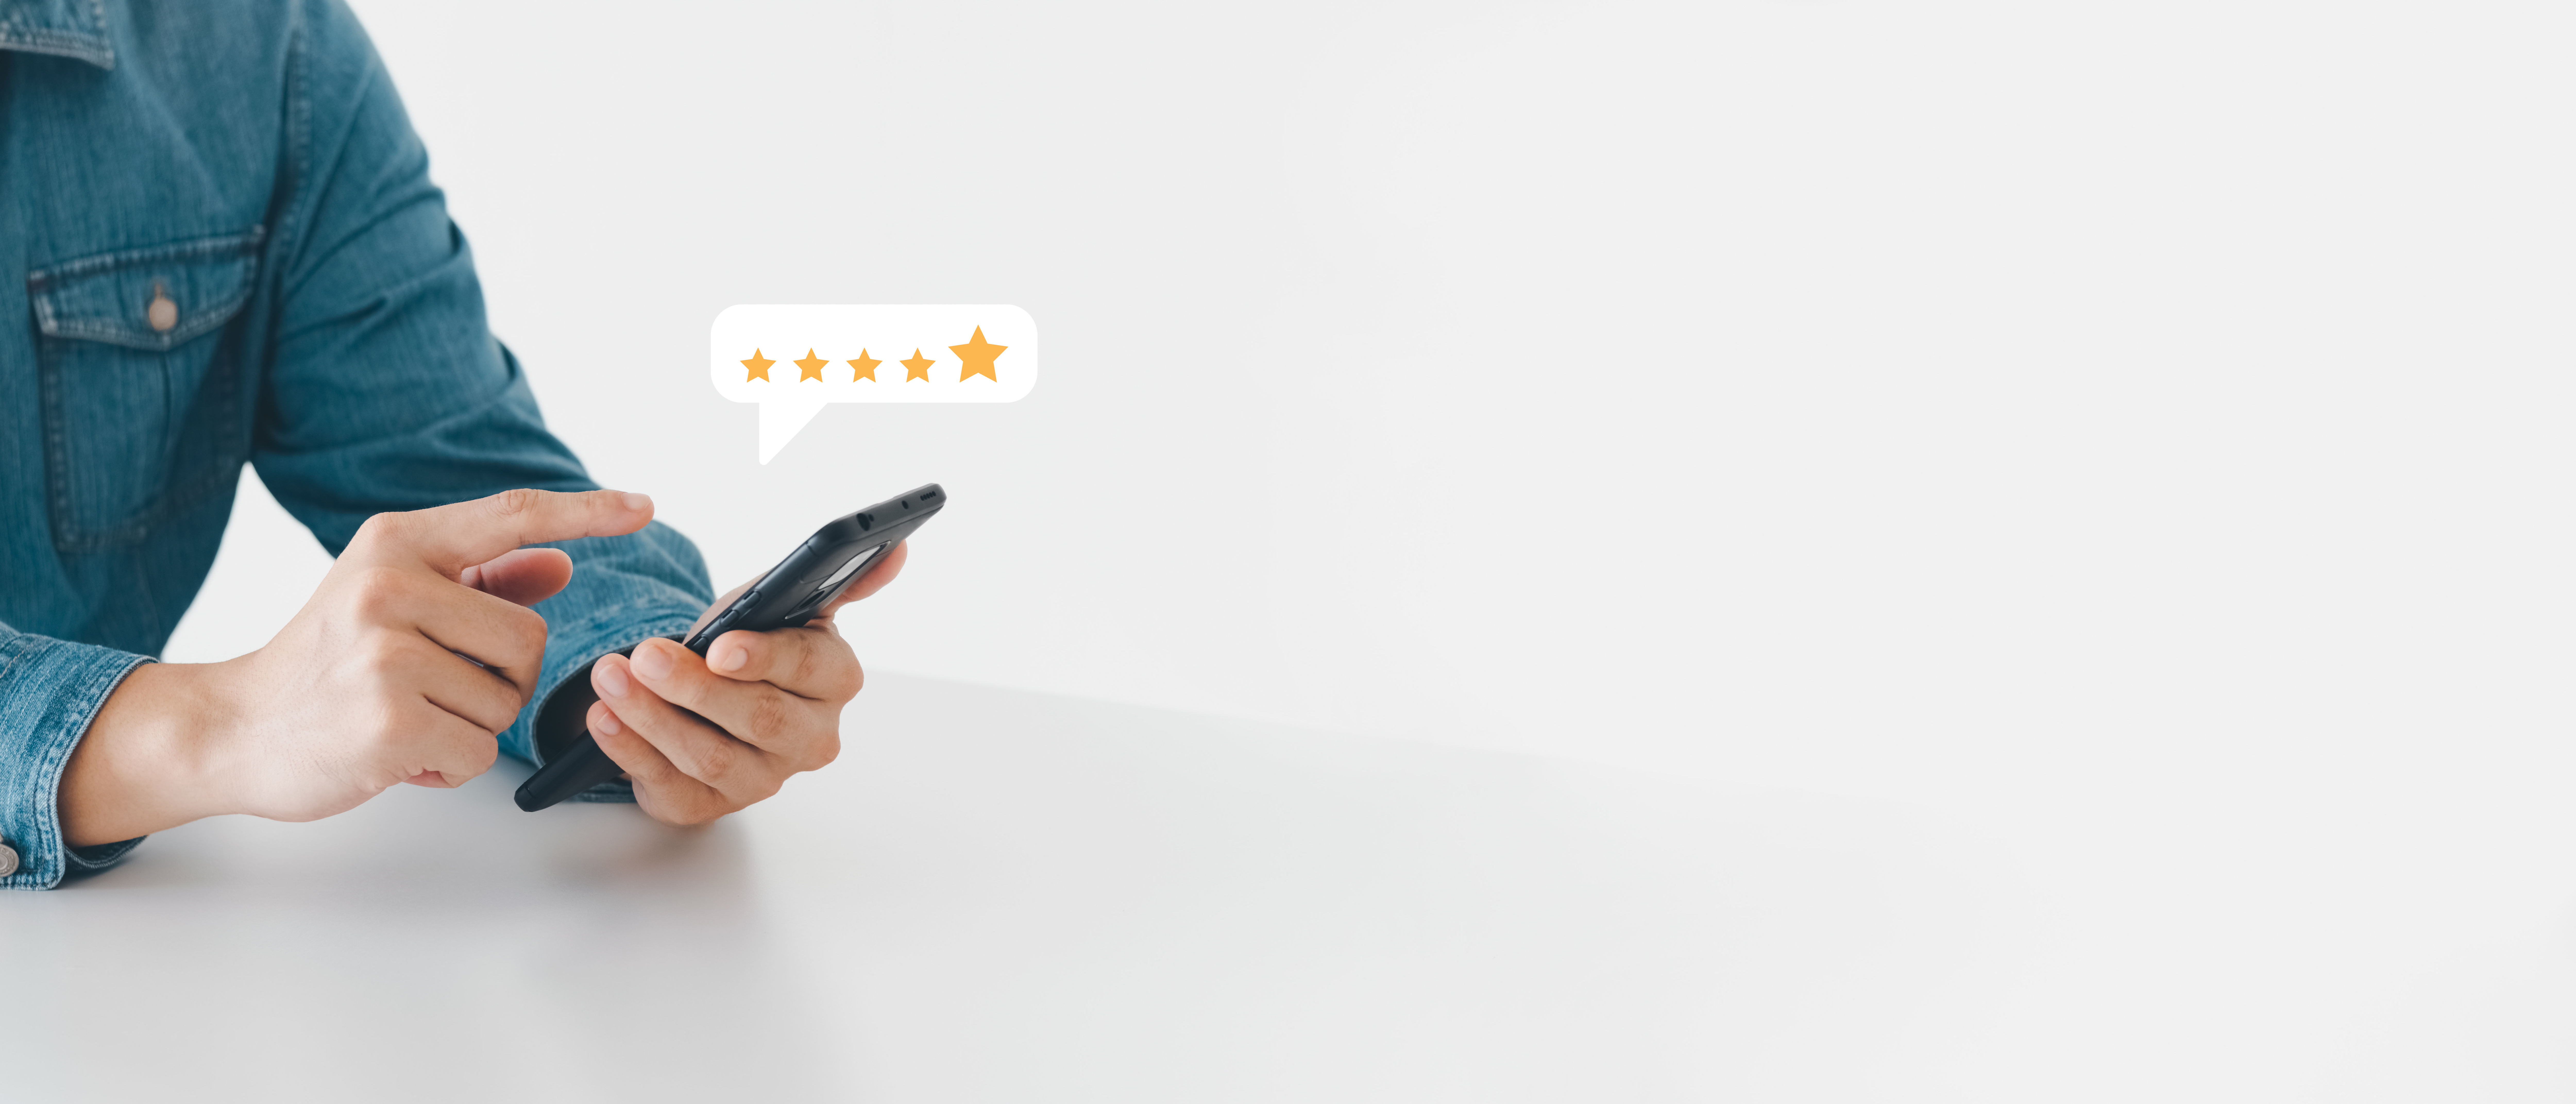 The image shows a person using a smartphone, with a speech bubble containing a five-star rating graphic, suggesting the phone is being used to rate or review something.